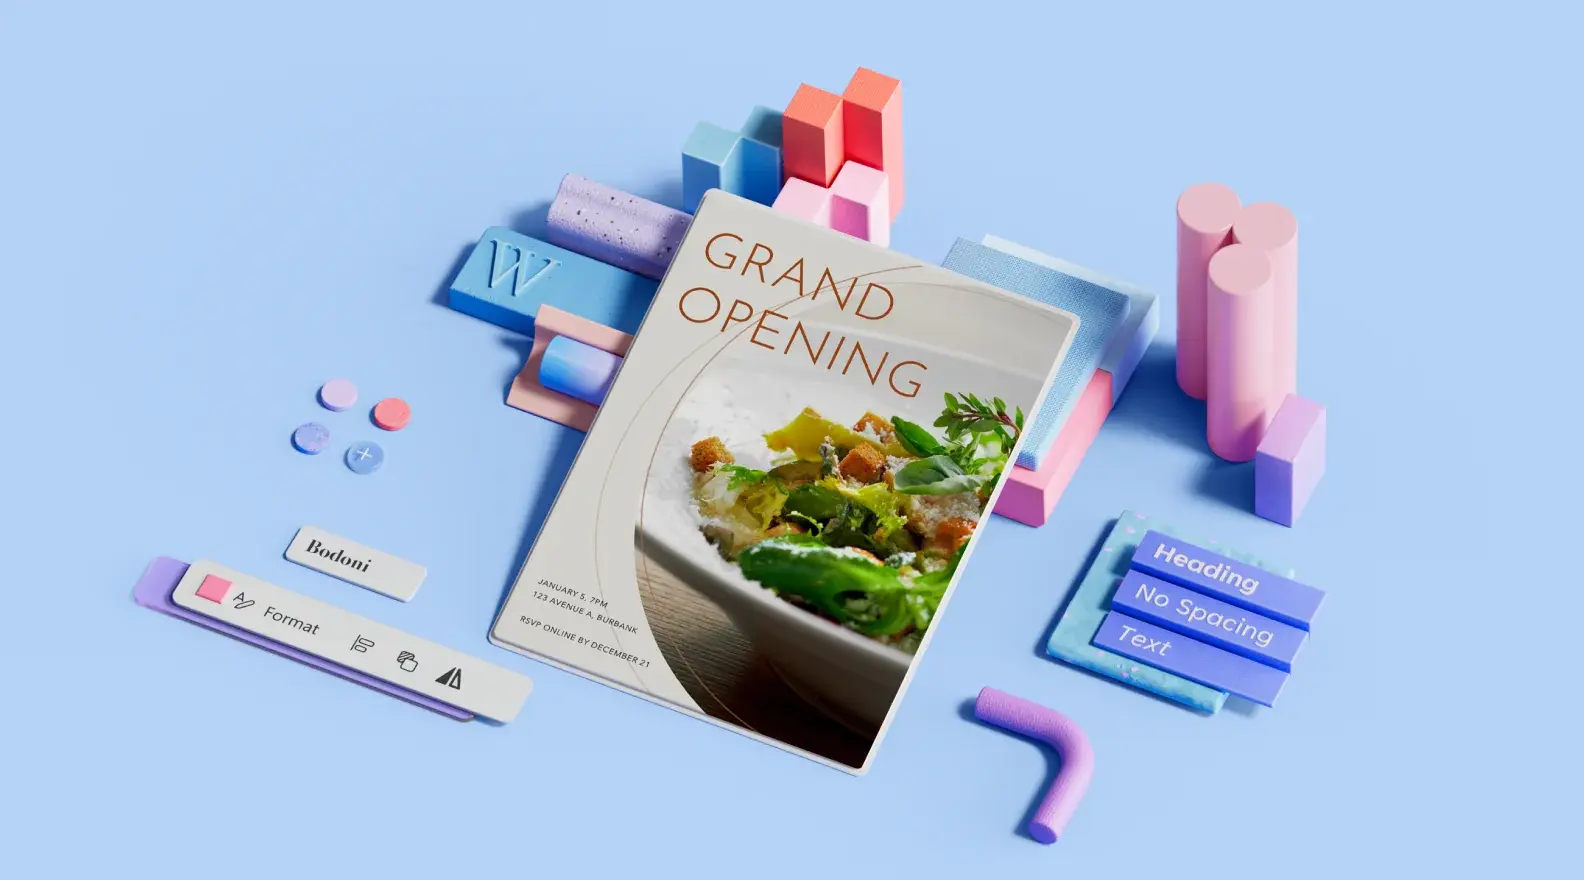 Grand opening flyer template surrounded by 3D design elements